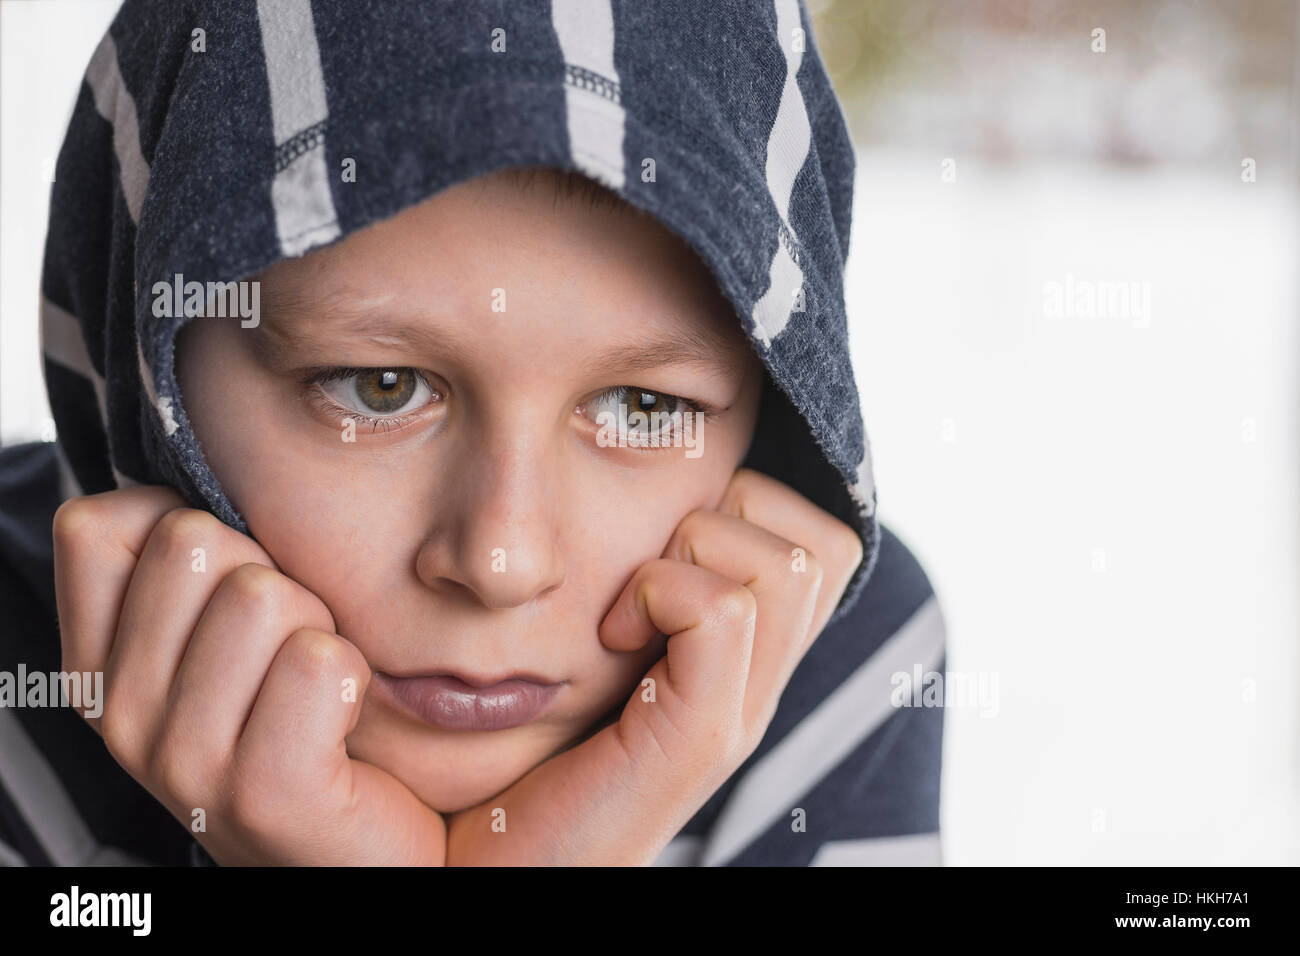 Sad Boy. Teenager with Sad Expression Face Close Up. Depression, Loneliness and Stress Concept. Stock Photo